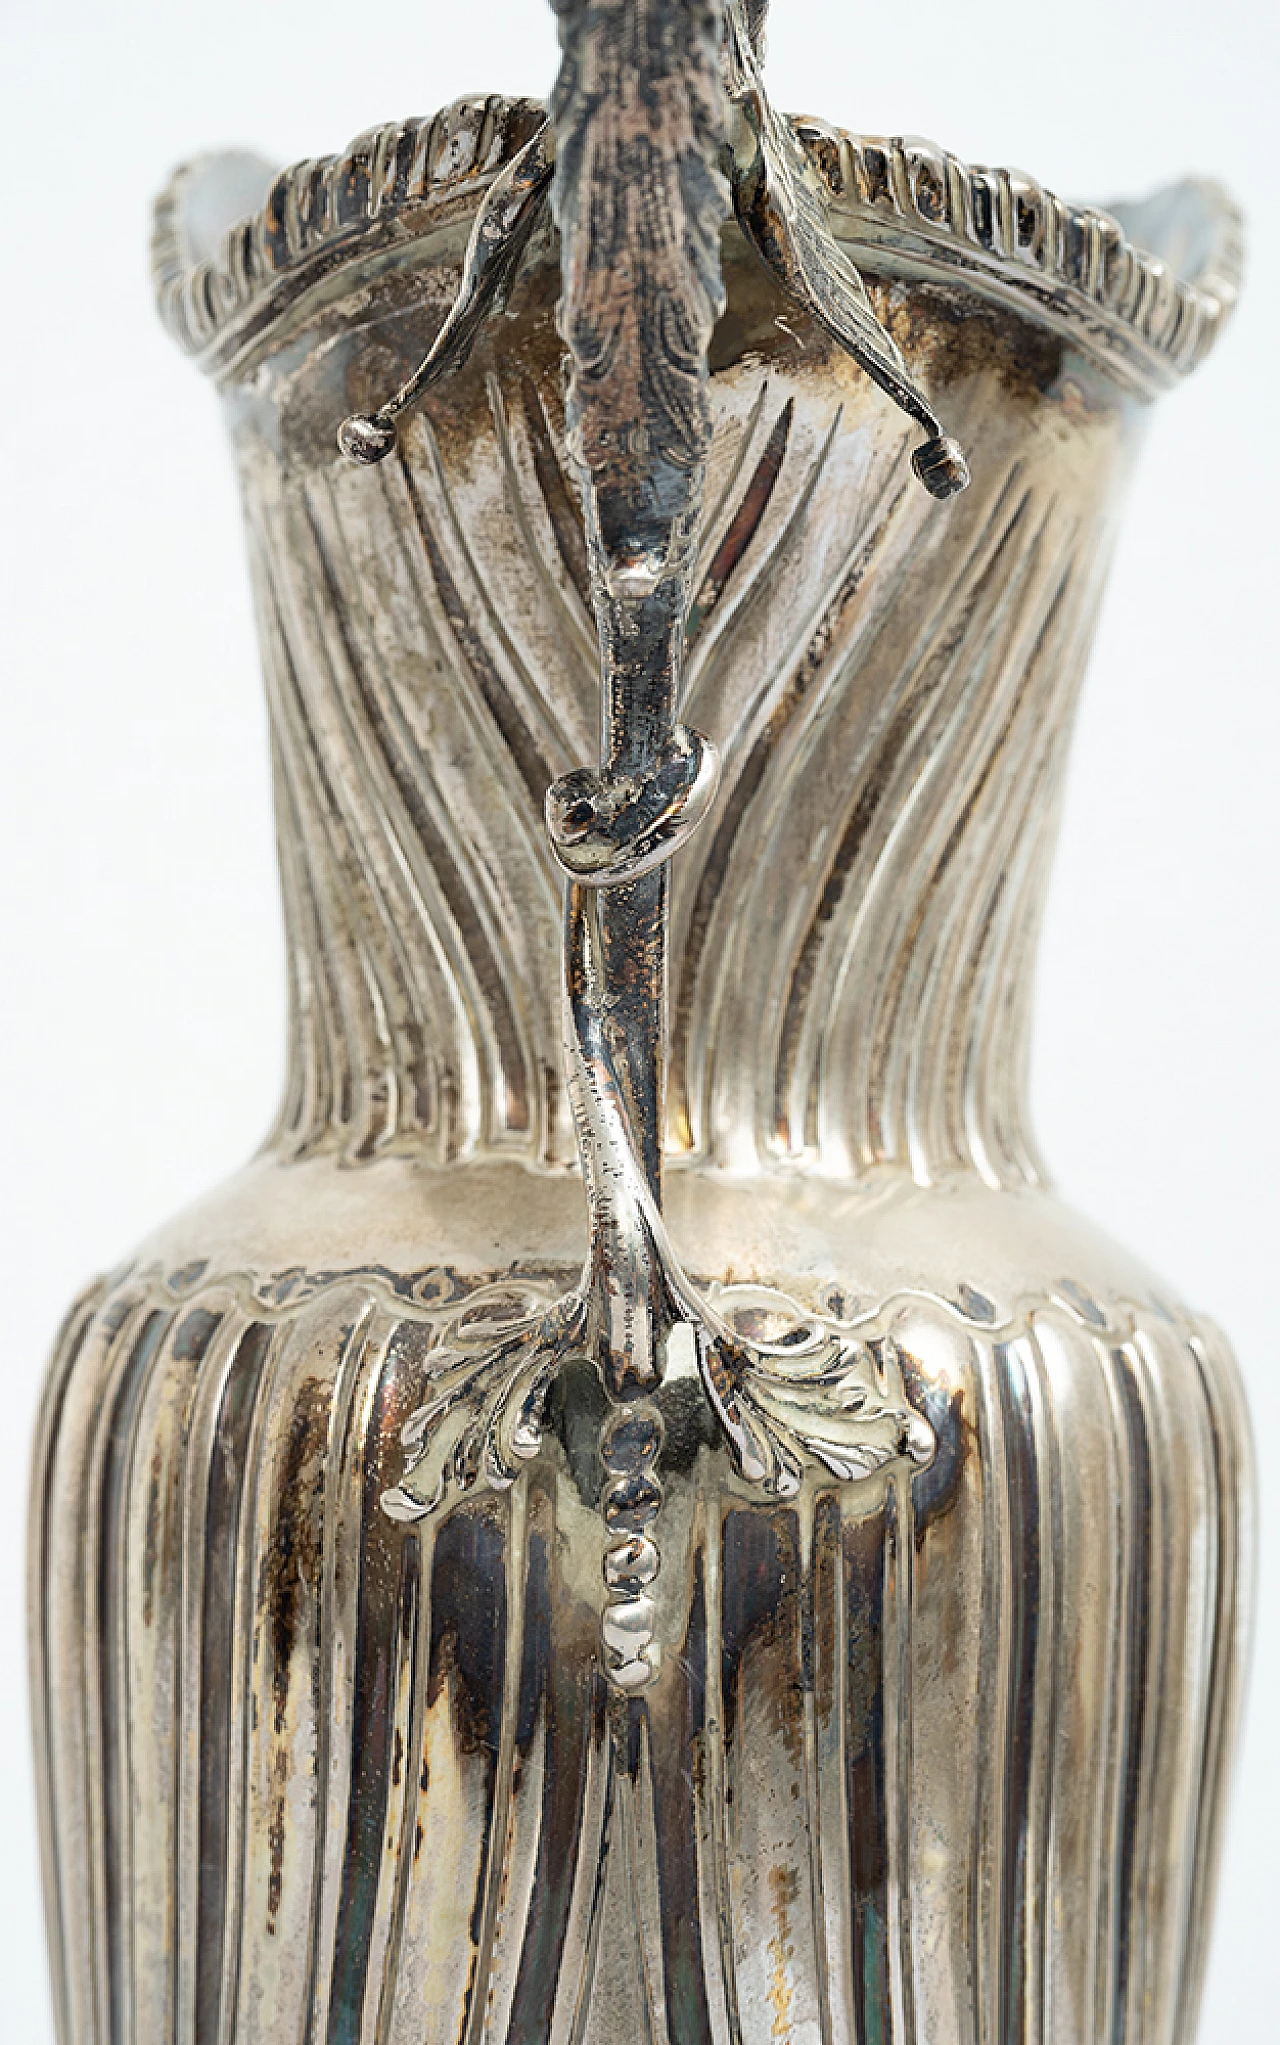 Silver sinusoidal-shaped jug with thick chisel on the edge 3